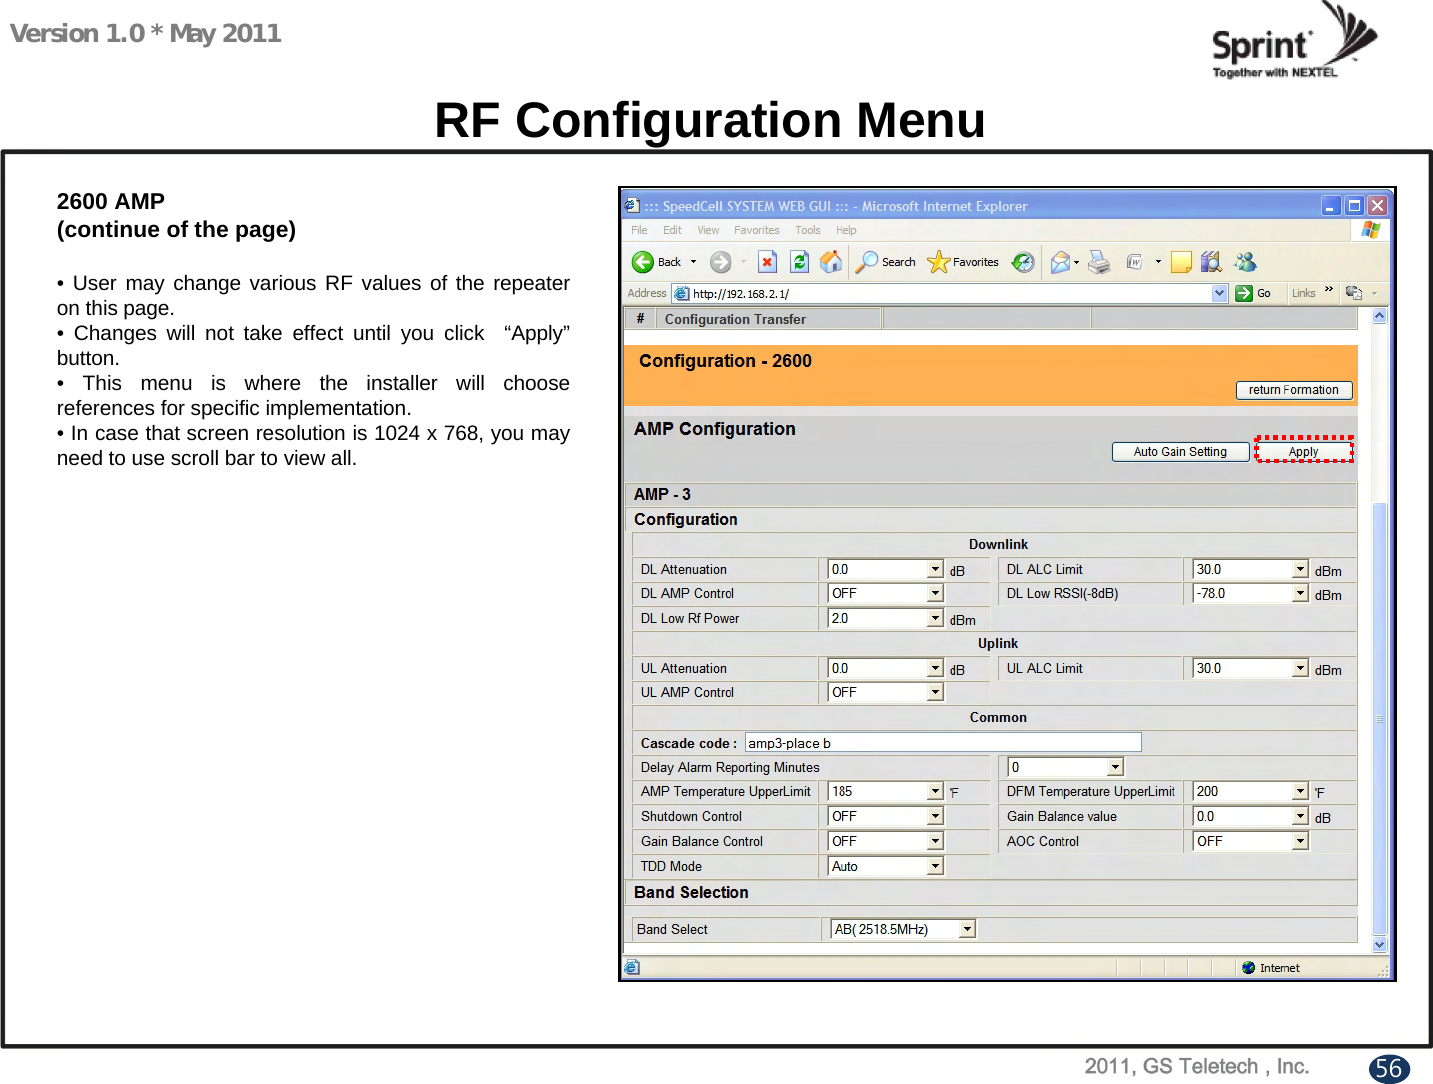 Version 1.0 * May 2011RF Configuration Menu2600 AMP(continue of the page)• User may change various RF values of the repeater on this page.• Changes will not take effect until you click  “Apply”button.• This menu is where the installer will choose references for specific implementation.• In case that screen resolution is 1024 x 768, you may need to use scroll bar to view all.56